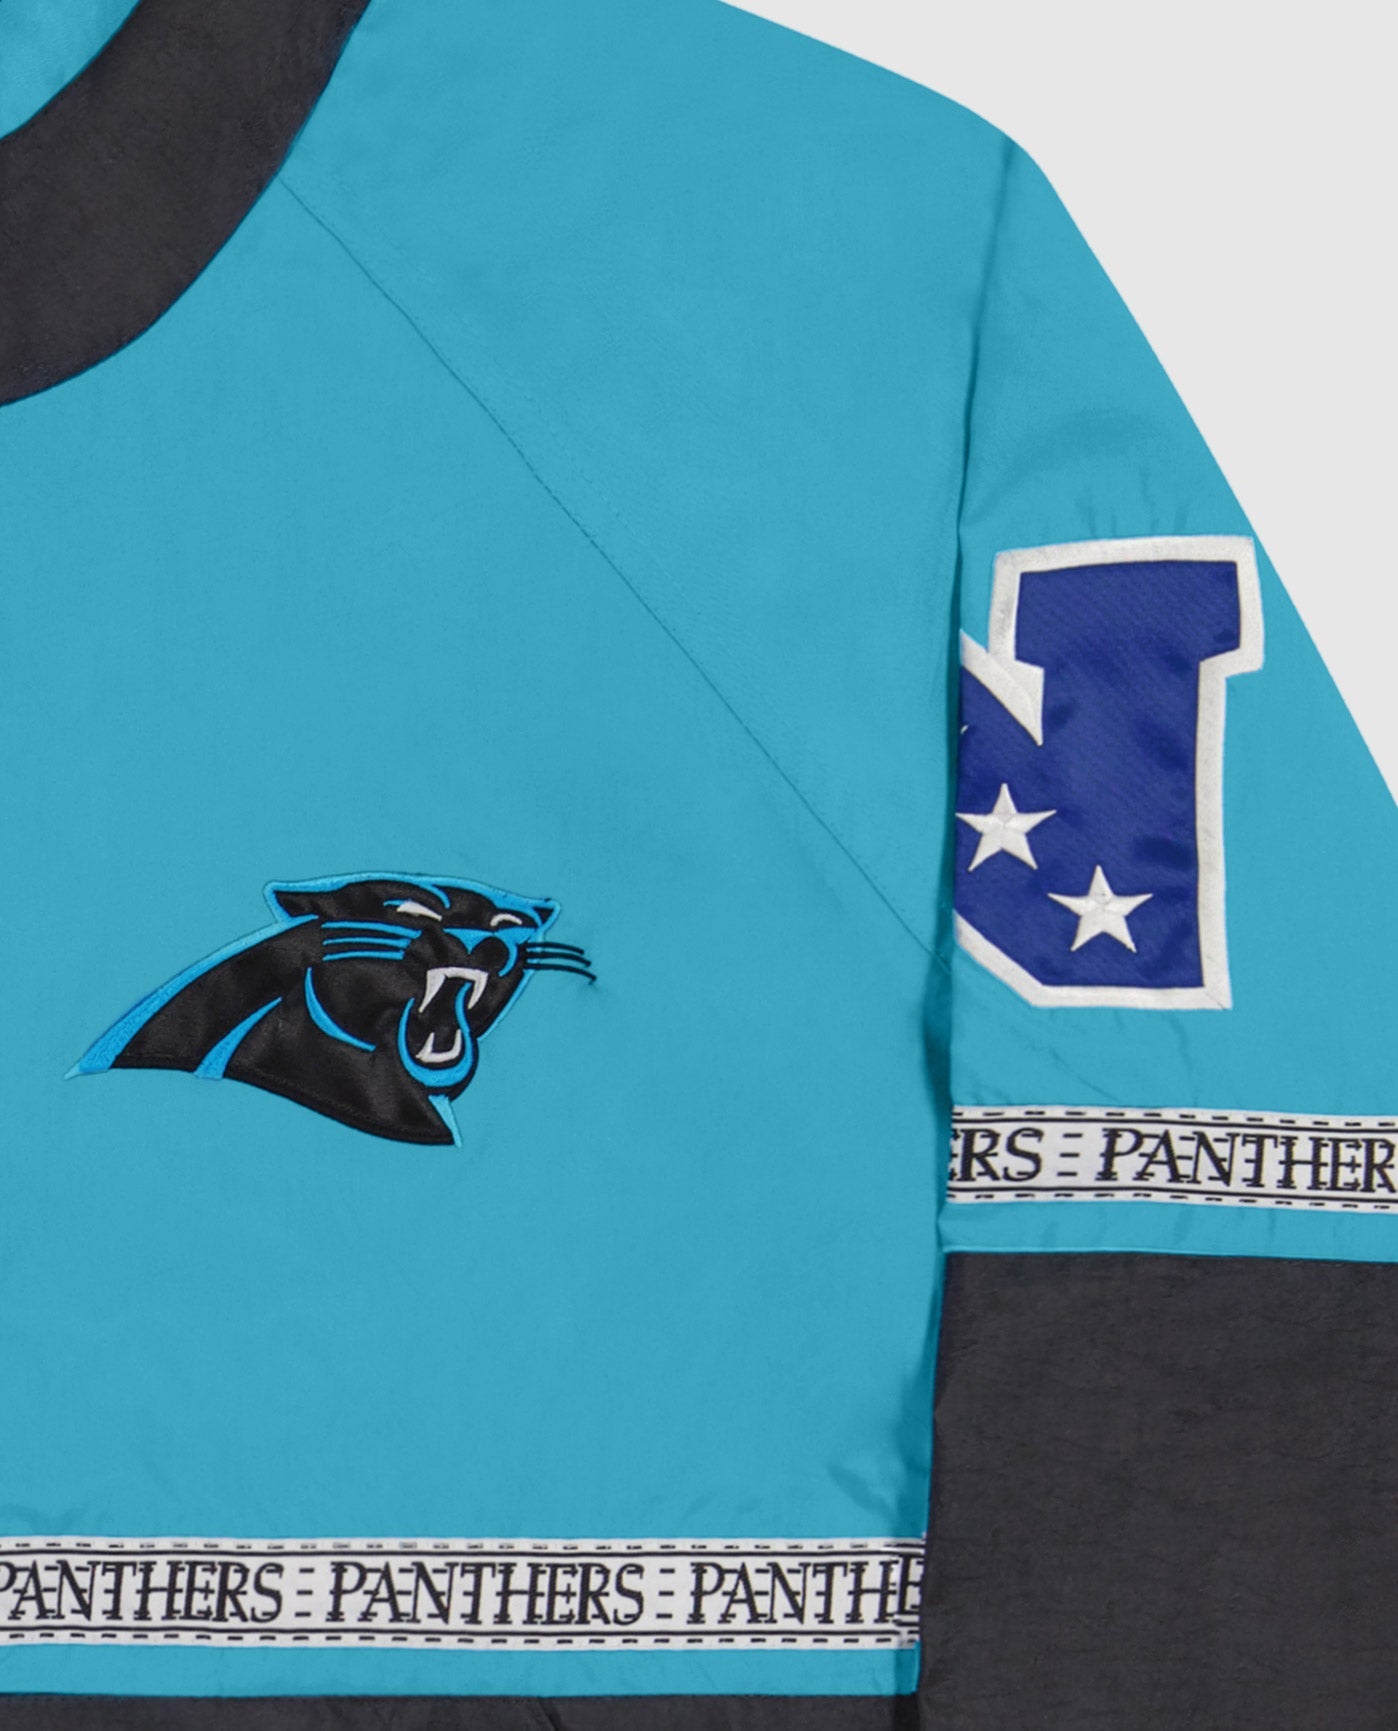 Carolina Panthers logo top left chest,Twill Applique Conference logo and "PANTHER" tape on the mid body and sleeves | Panthers Light Blue Black